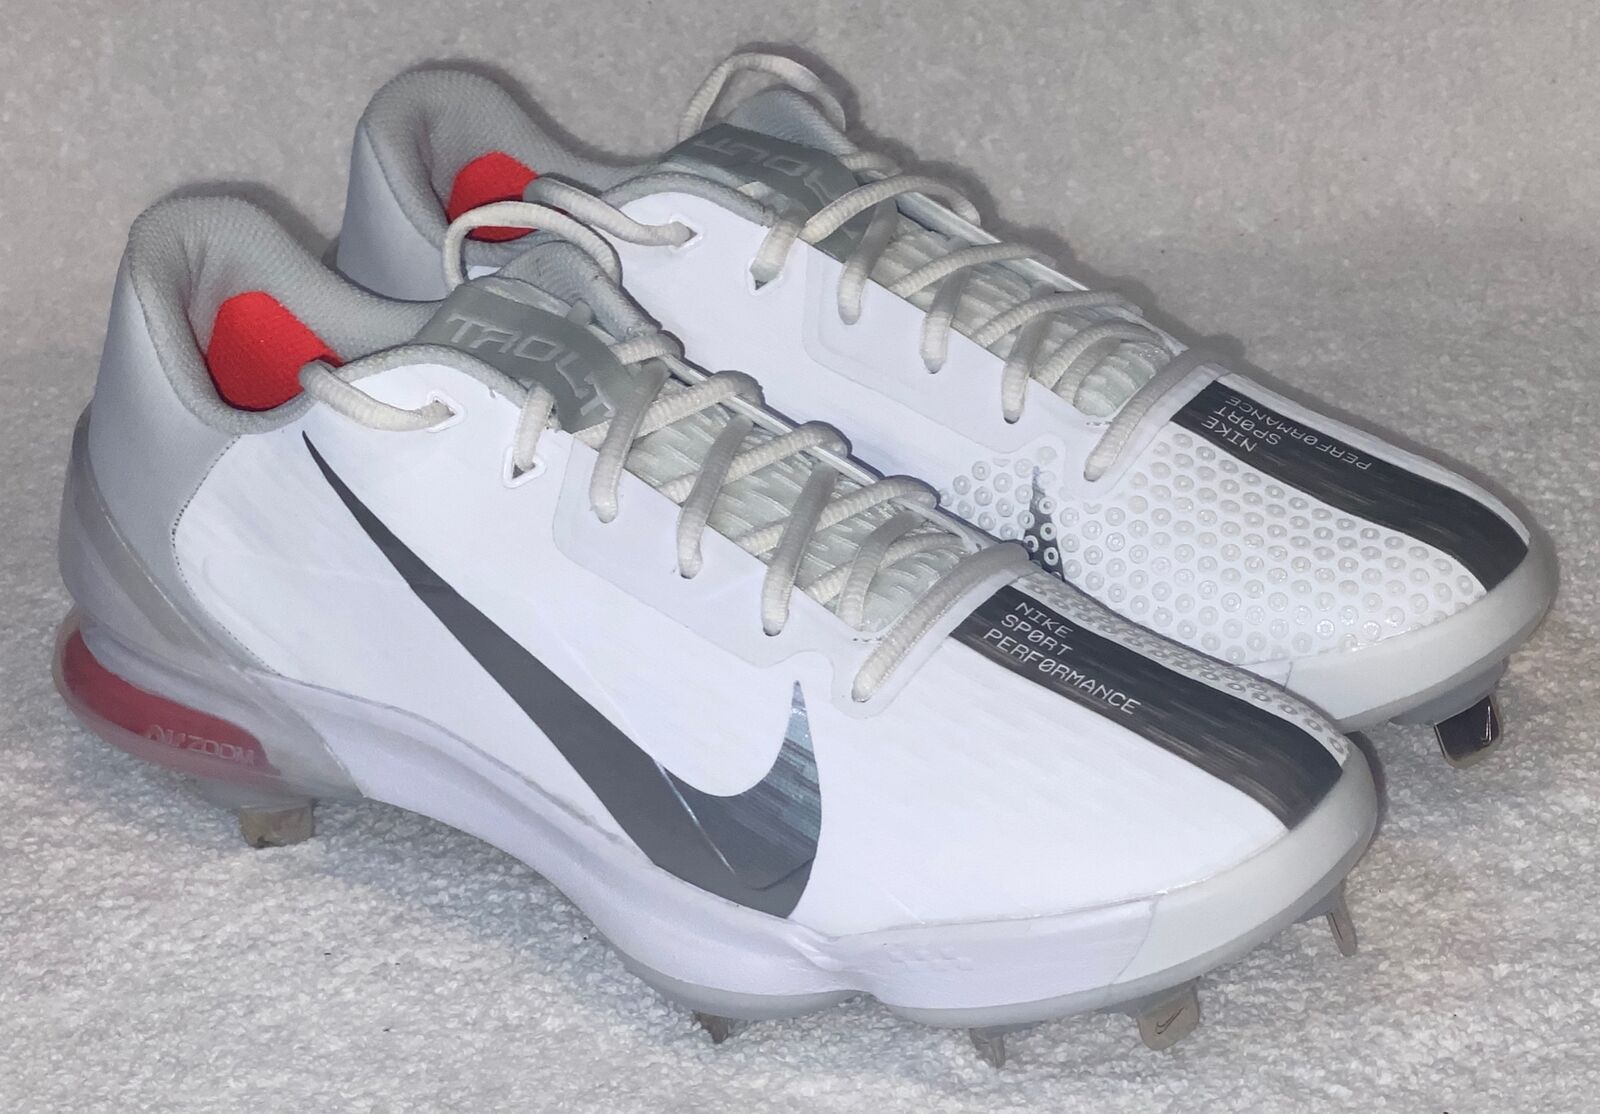 NIKE Force Trout 7 Pro White Silver Metal Spike Baseball Cleats